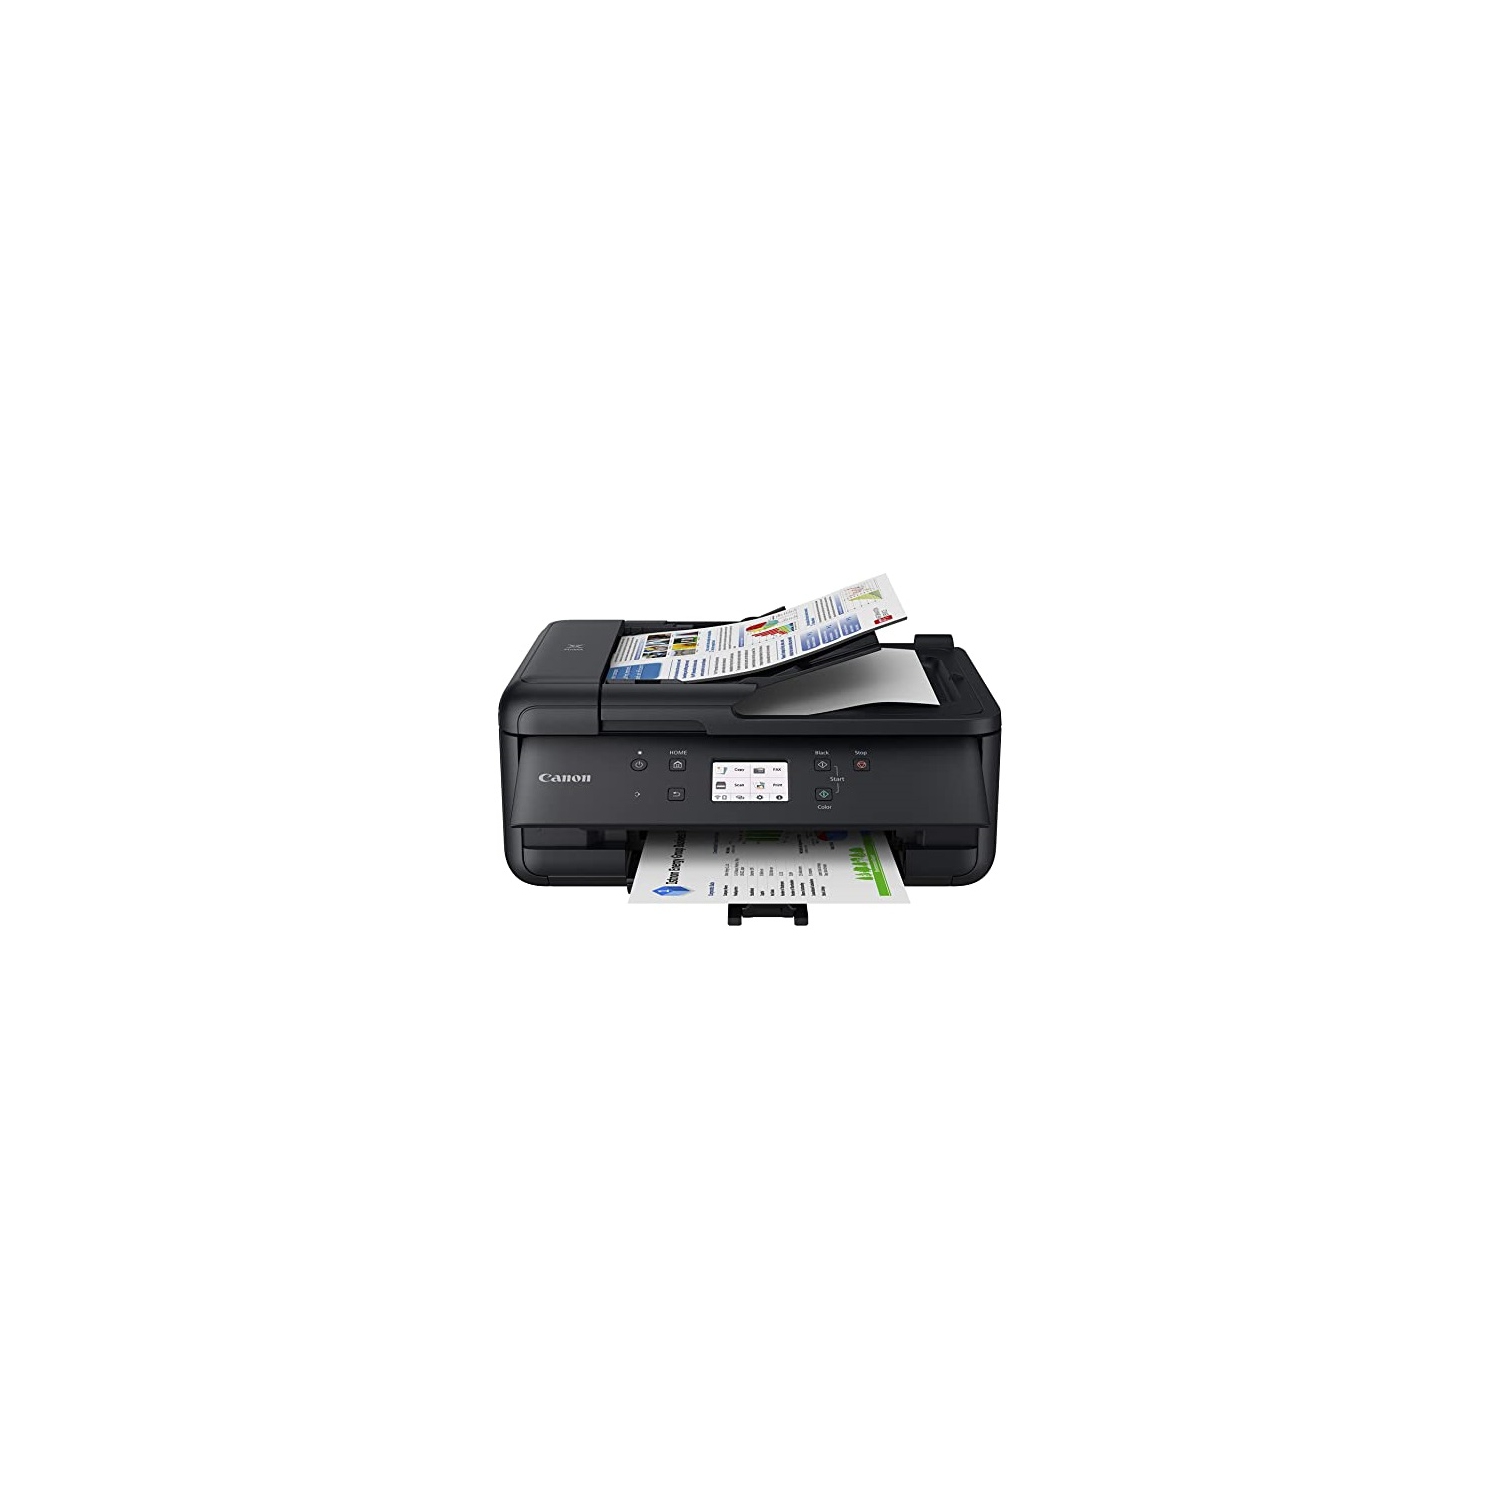 Canon TR7620 Wireless Home Office All-In-One Printer Print/Copy/Scan/Fax